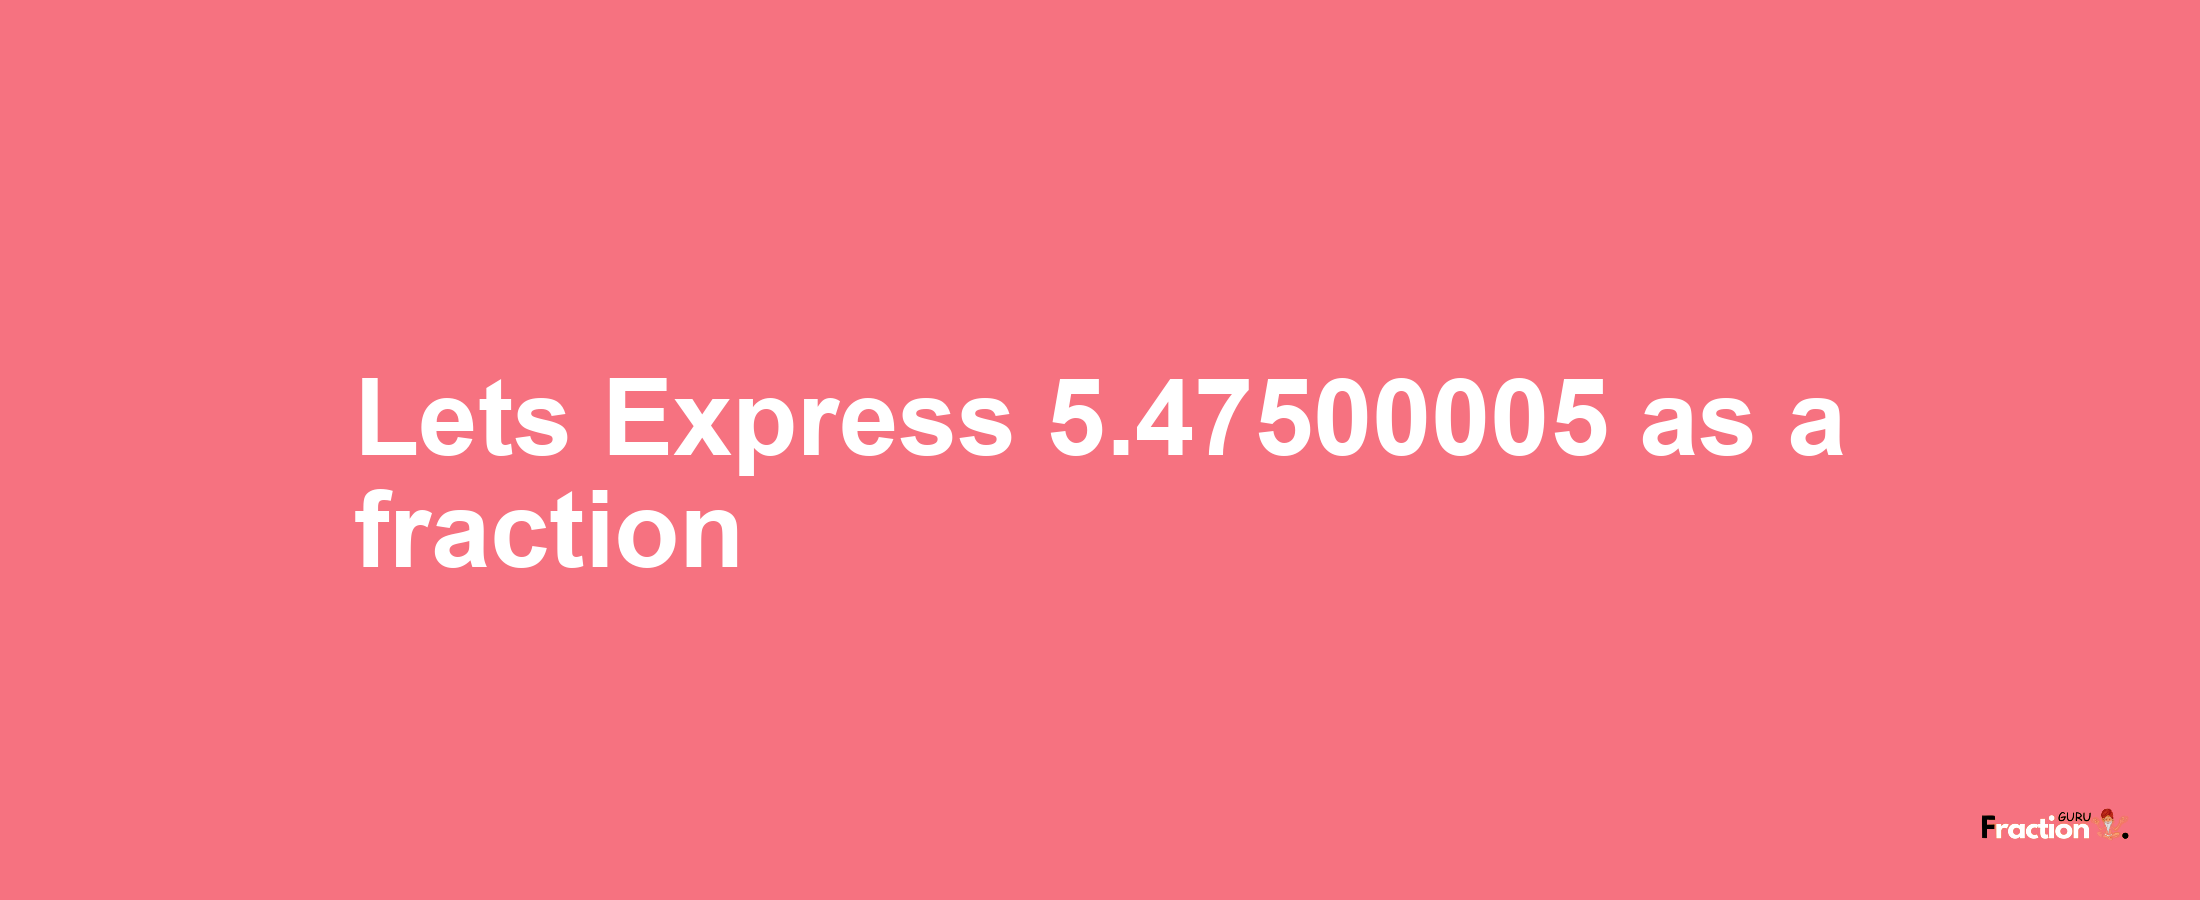 Lets Express 5.47500005 as afraction